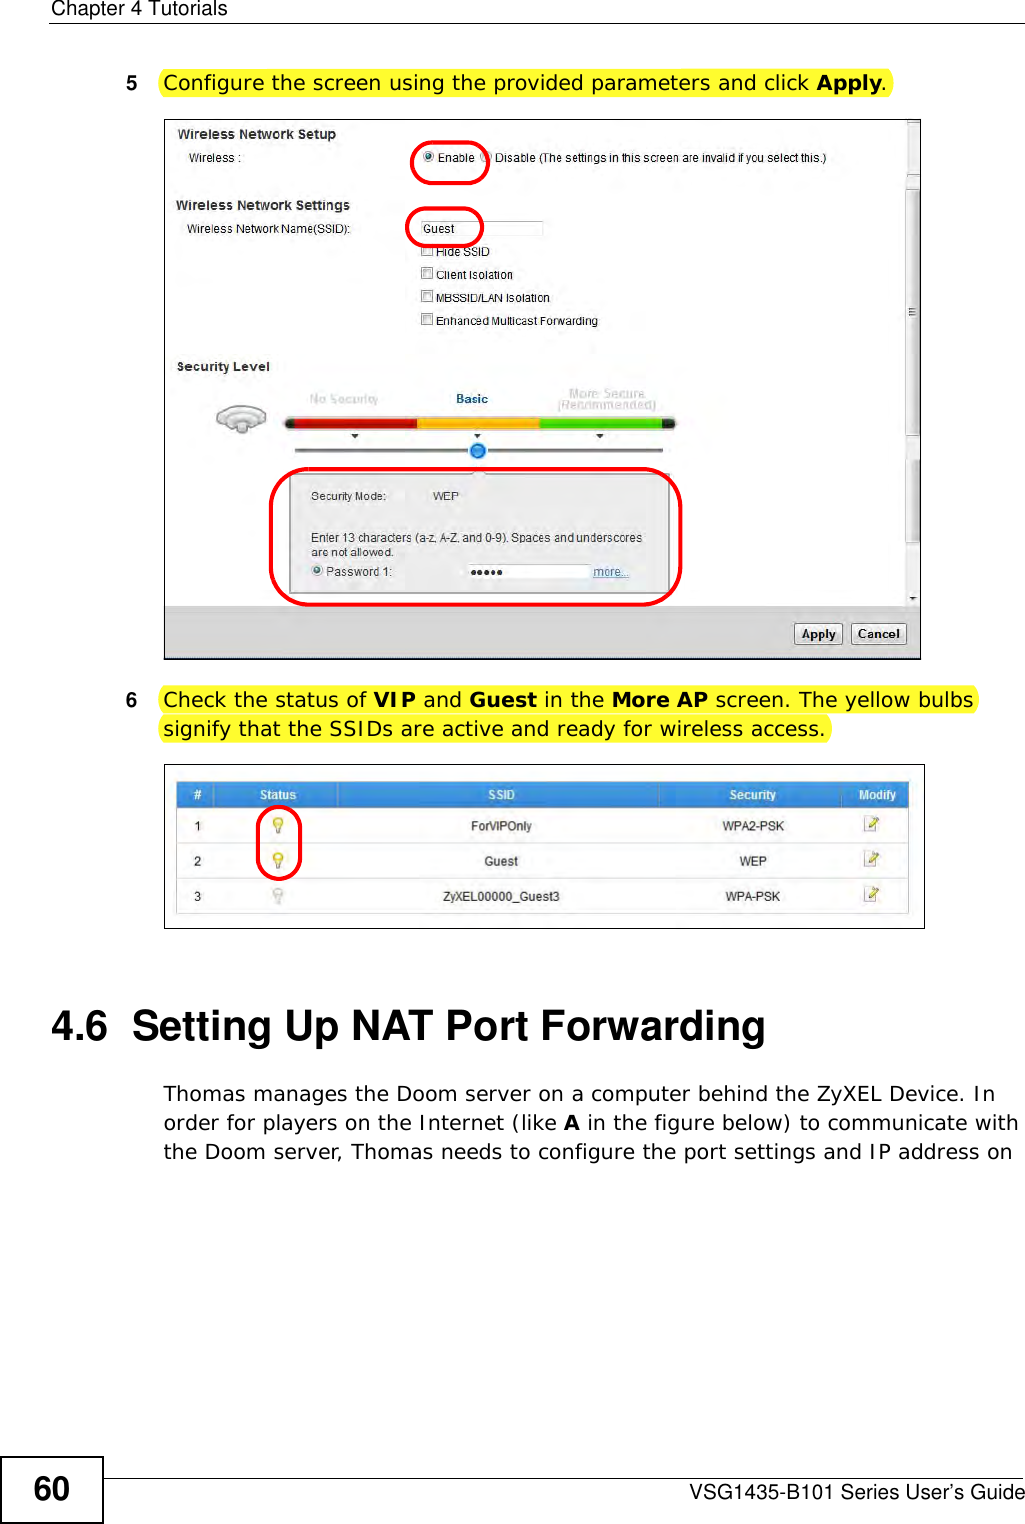 Chapter 4 TutorialsVSG1435-B101 Series User’s Guide605Configure the screen using the provided parameters and click Apply.6Check the status of VIP and Guest in the More AP screen. The yellow bulbs signify that the SSIDs are active and ready for wireless access. 4.6  Setting Up NAT Port ForwardingThomas manages the Doom server on a computer behind the ZyXEL Device. In order for players on the Internet (like A in the figure below) to communicate with the Doom server, Thomas needs to configure the port settings and IP address on 